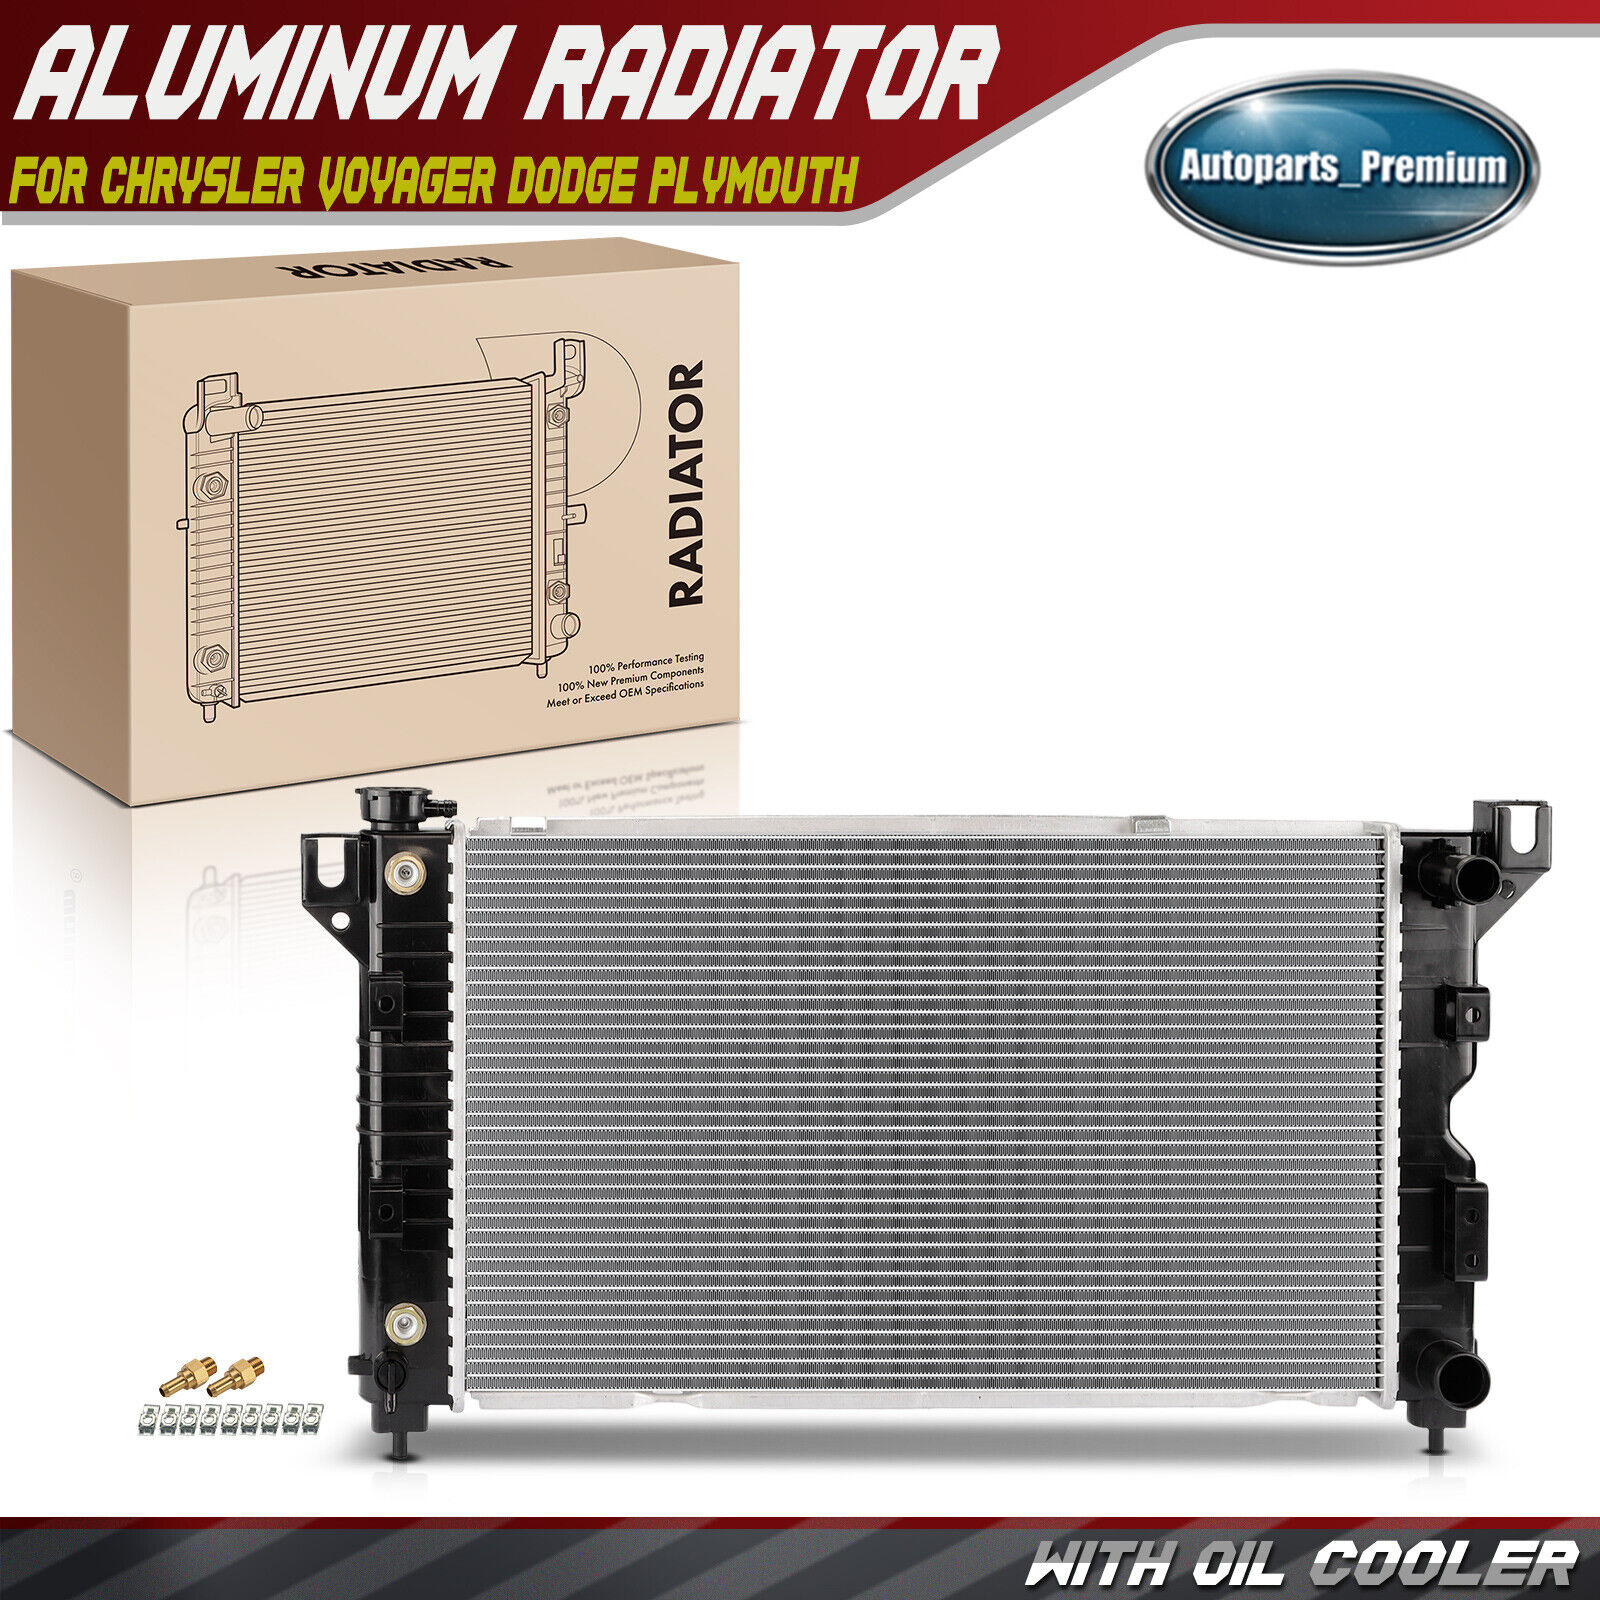 New Aluminum Radiator for Chrysler Grand Voyager Town & Country Dodge Plymouth